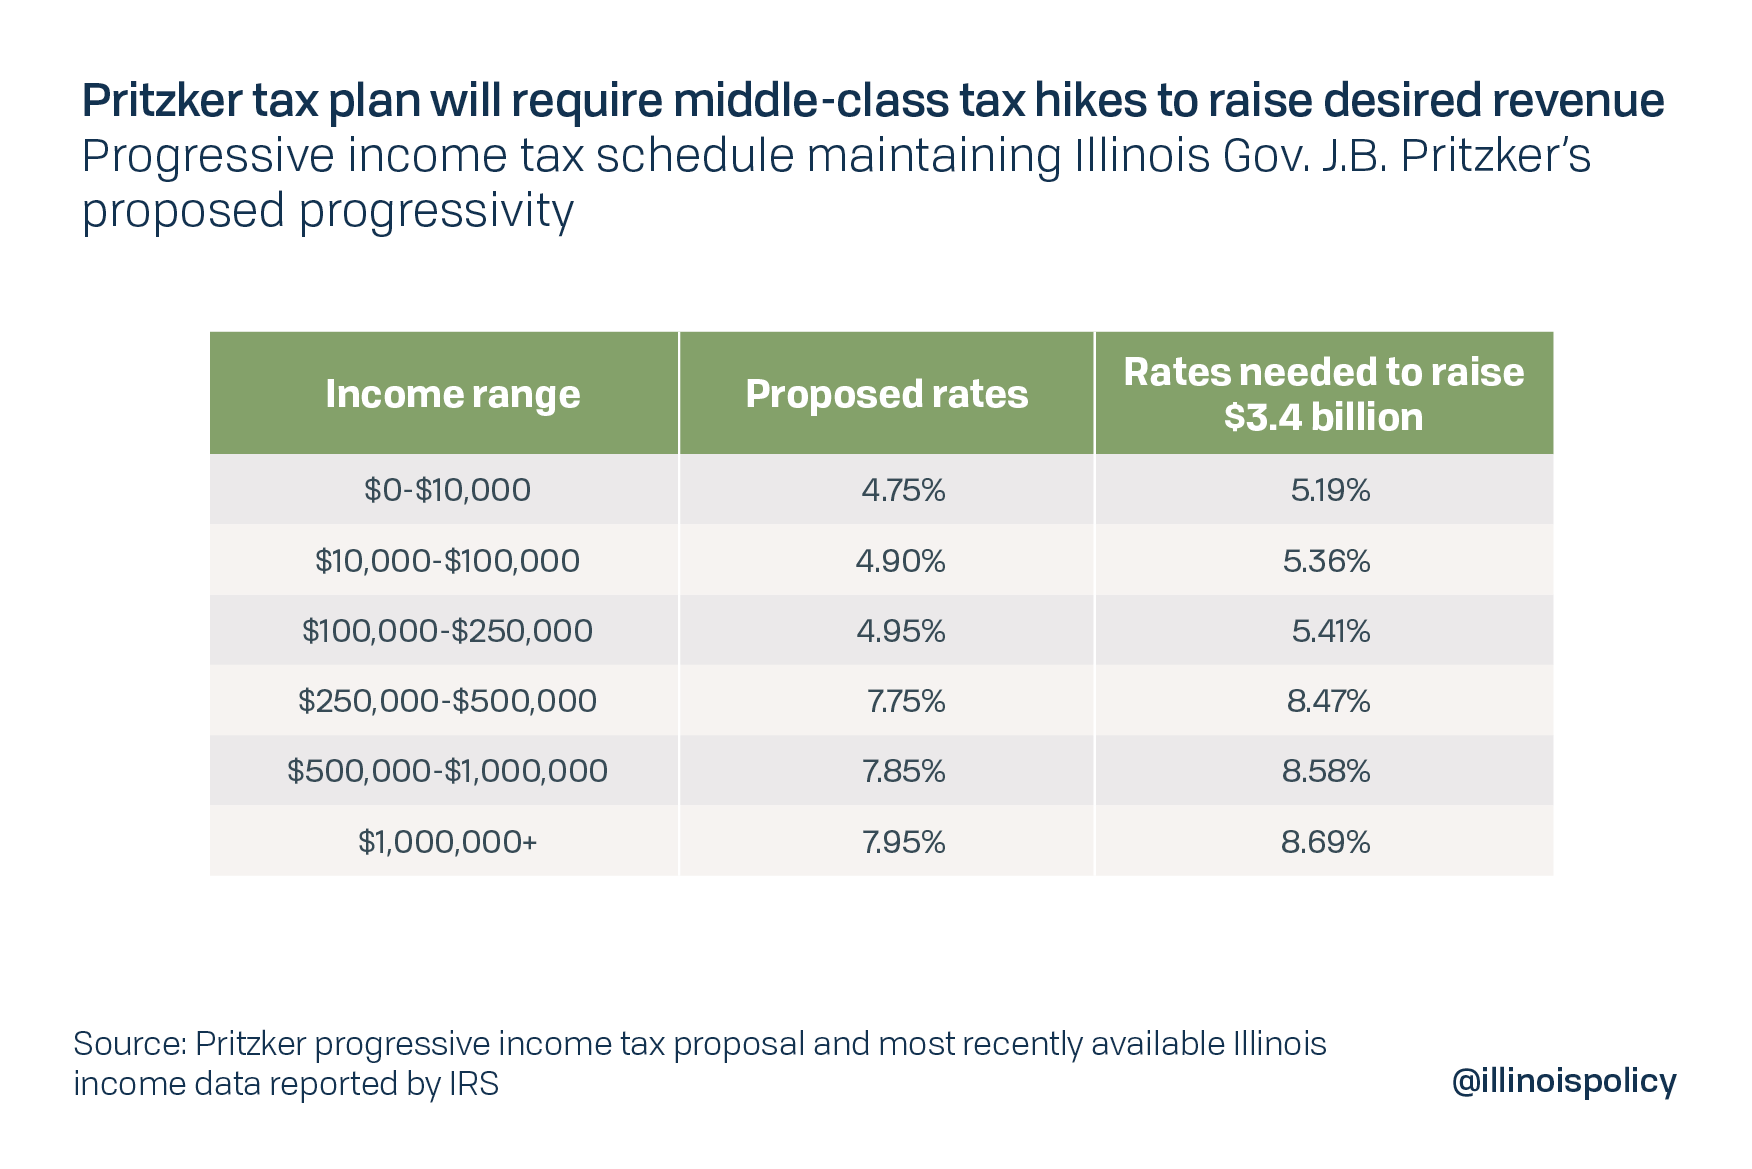 Pritzker tax plan will require middle class tax hikes to raise desired revenue